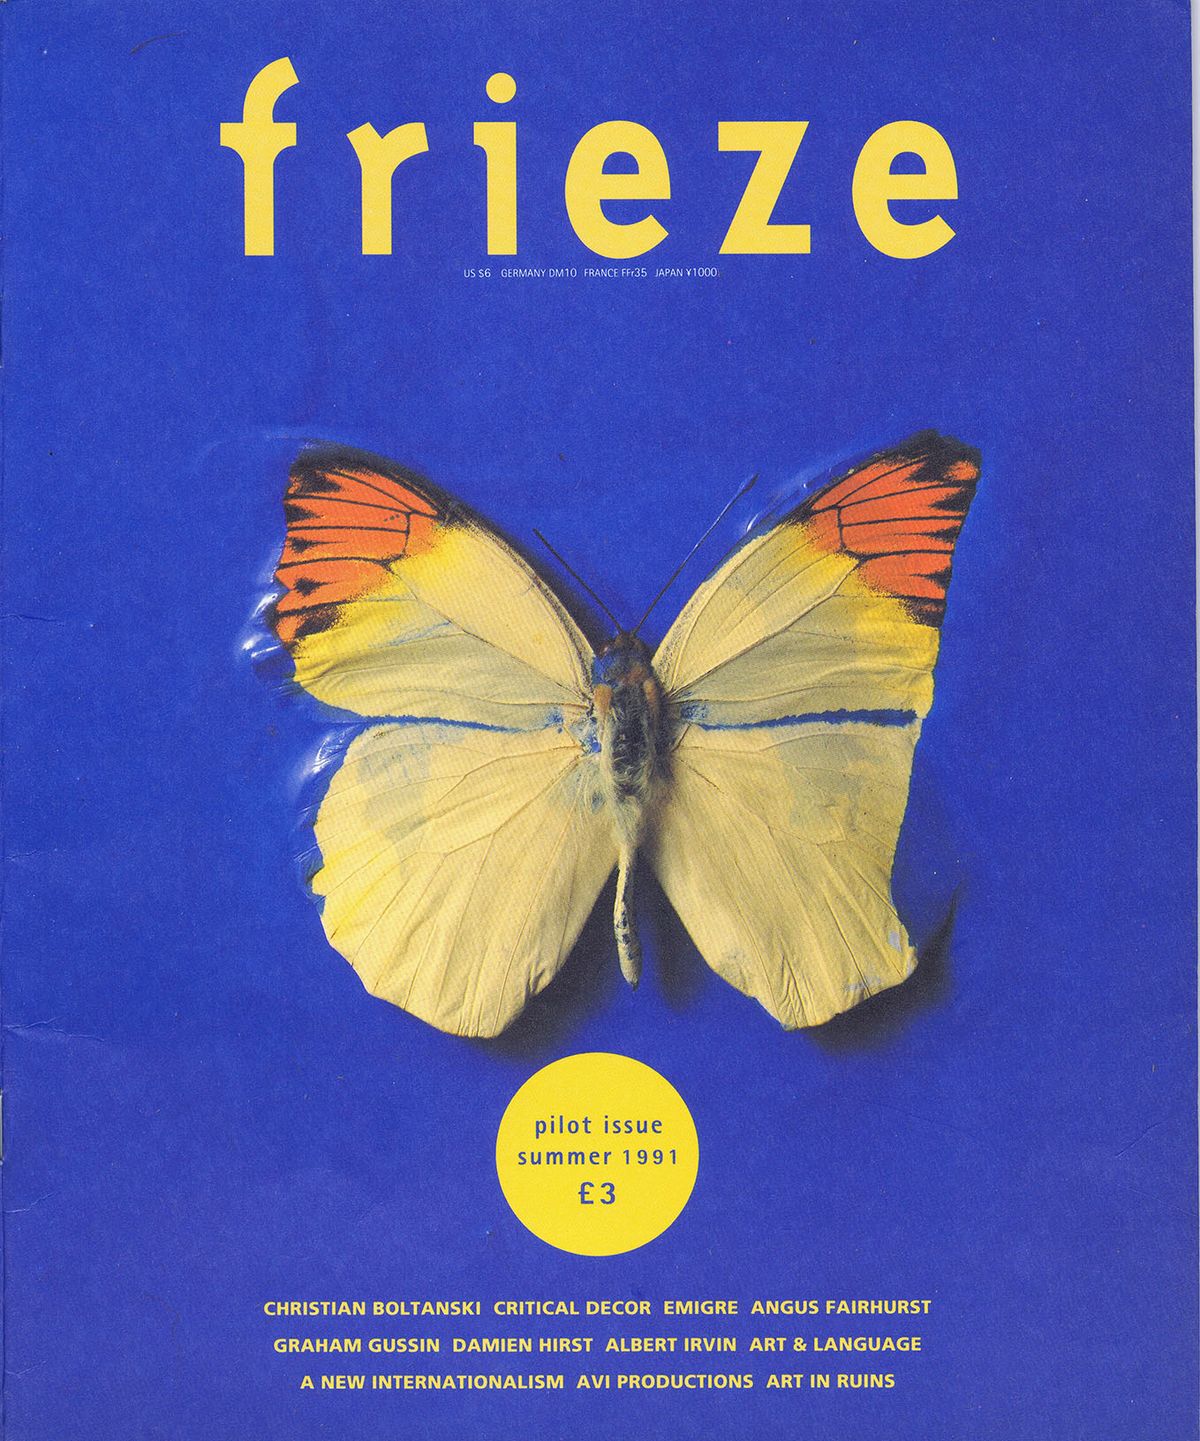 The cover of Frieze's pilot issue from summer 1991 Courtesy of Frieze